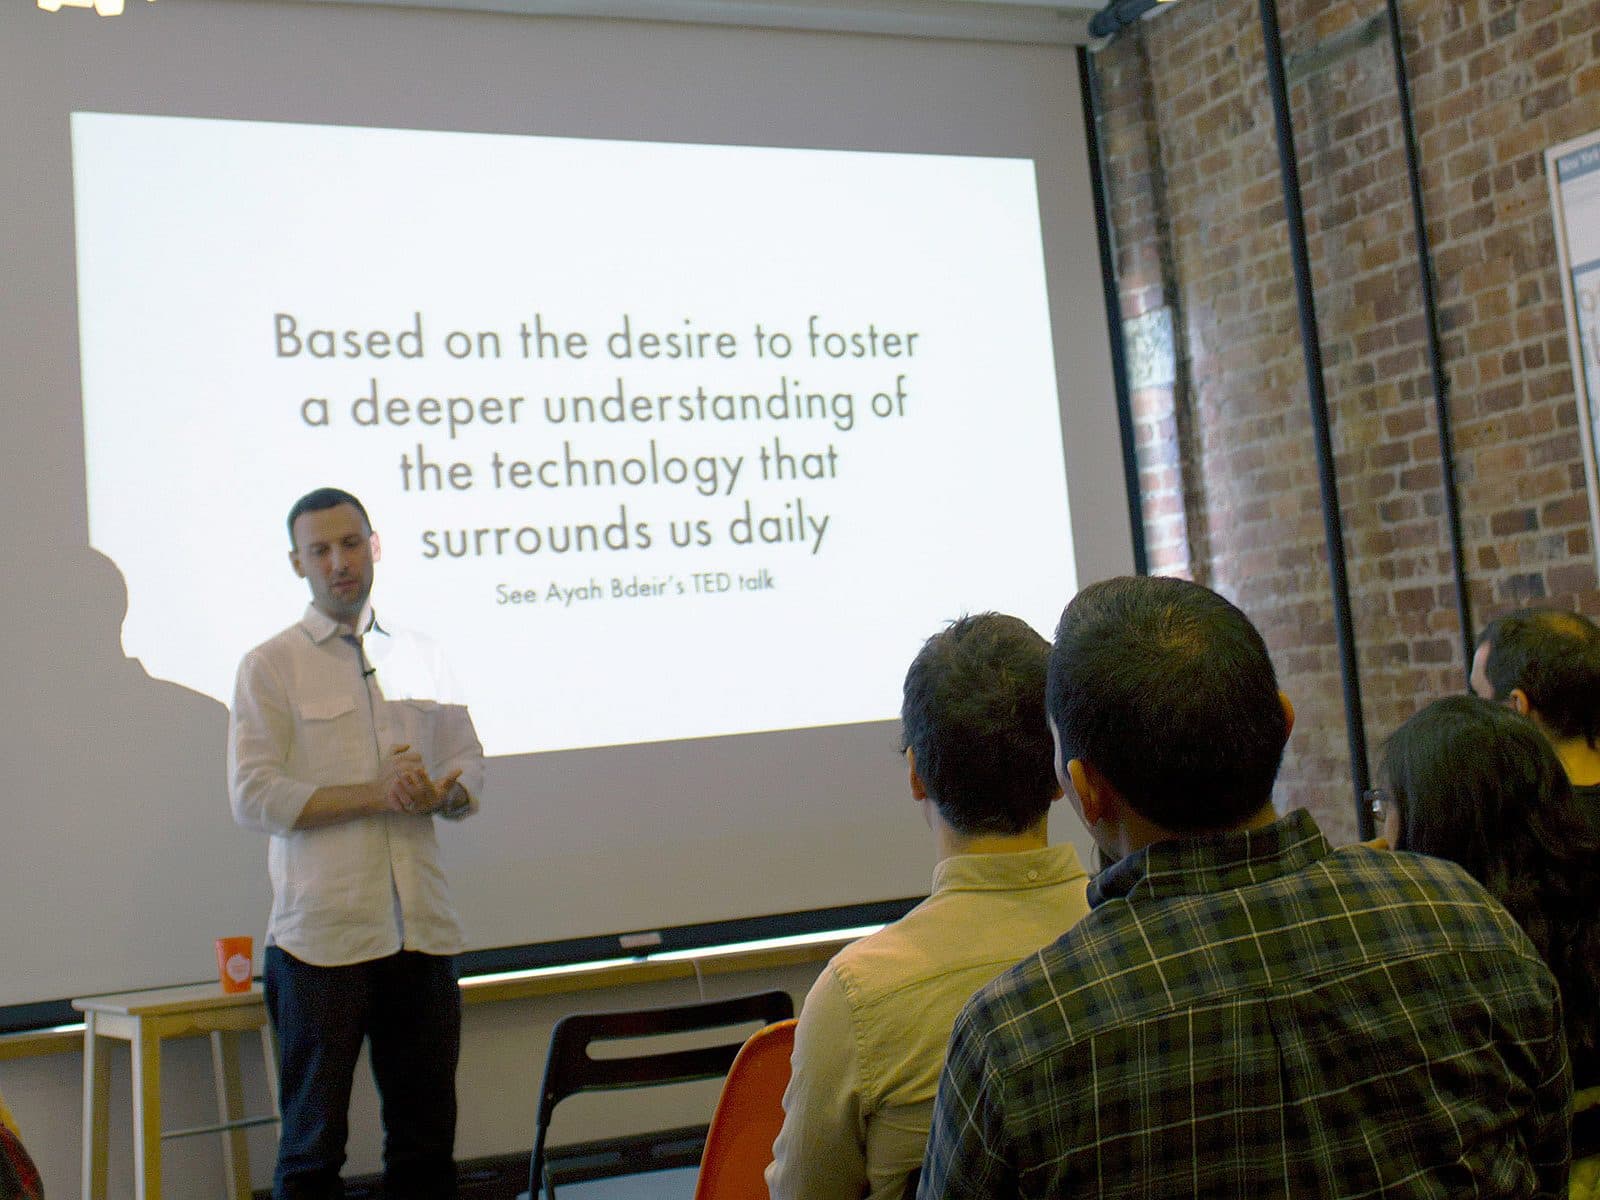 A man in a white shirt stands in front of a screen giving a presentation to an audience. The screen displays the text: "Based on the desire to foster a deeper understanding of the technology that surrounds us daily. See Ayah Bdeir’s TED talk.